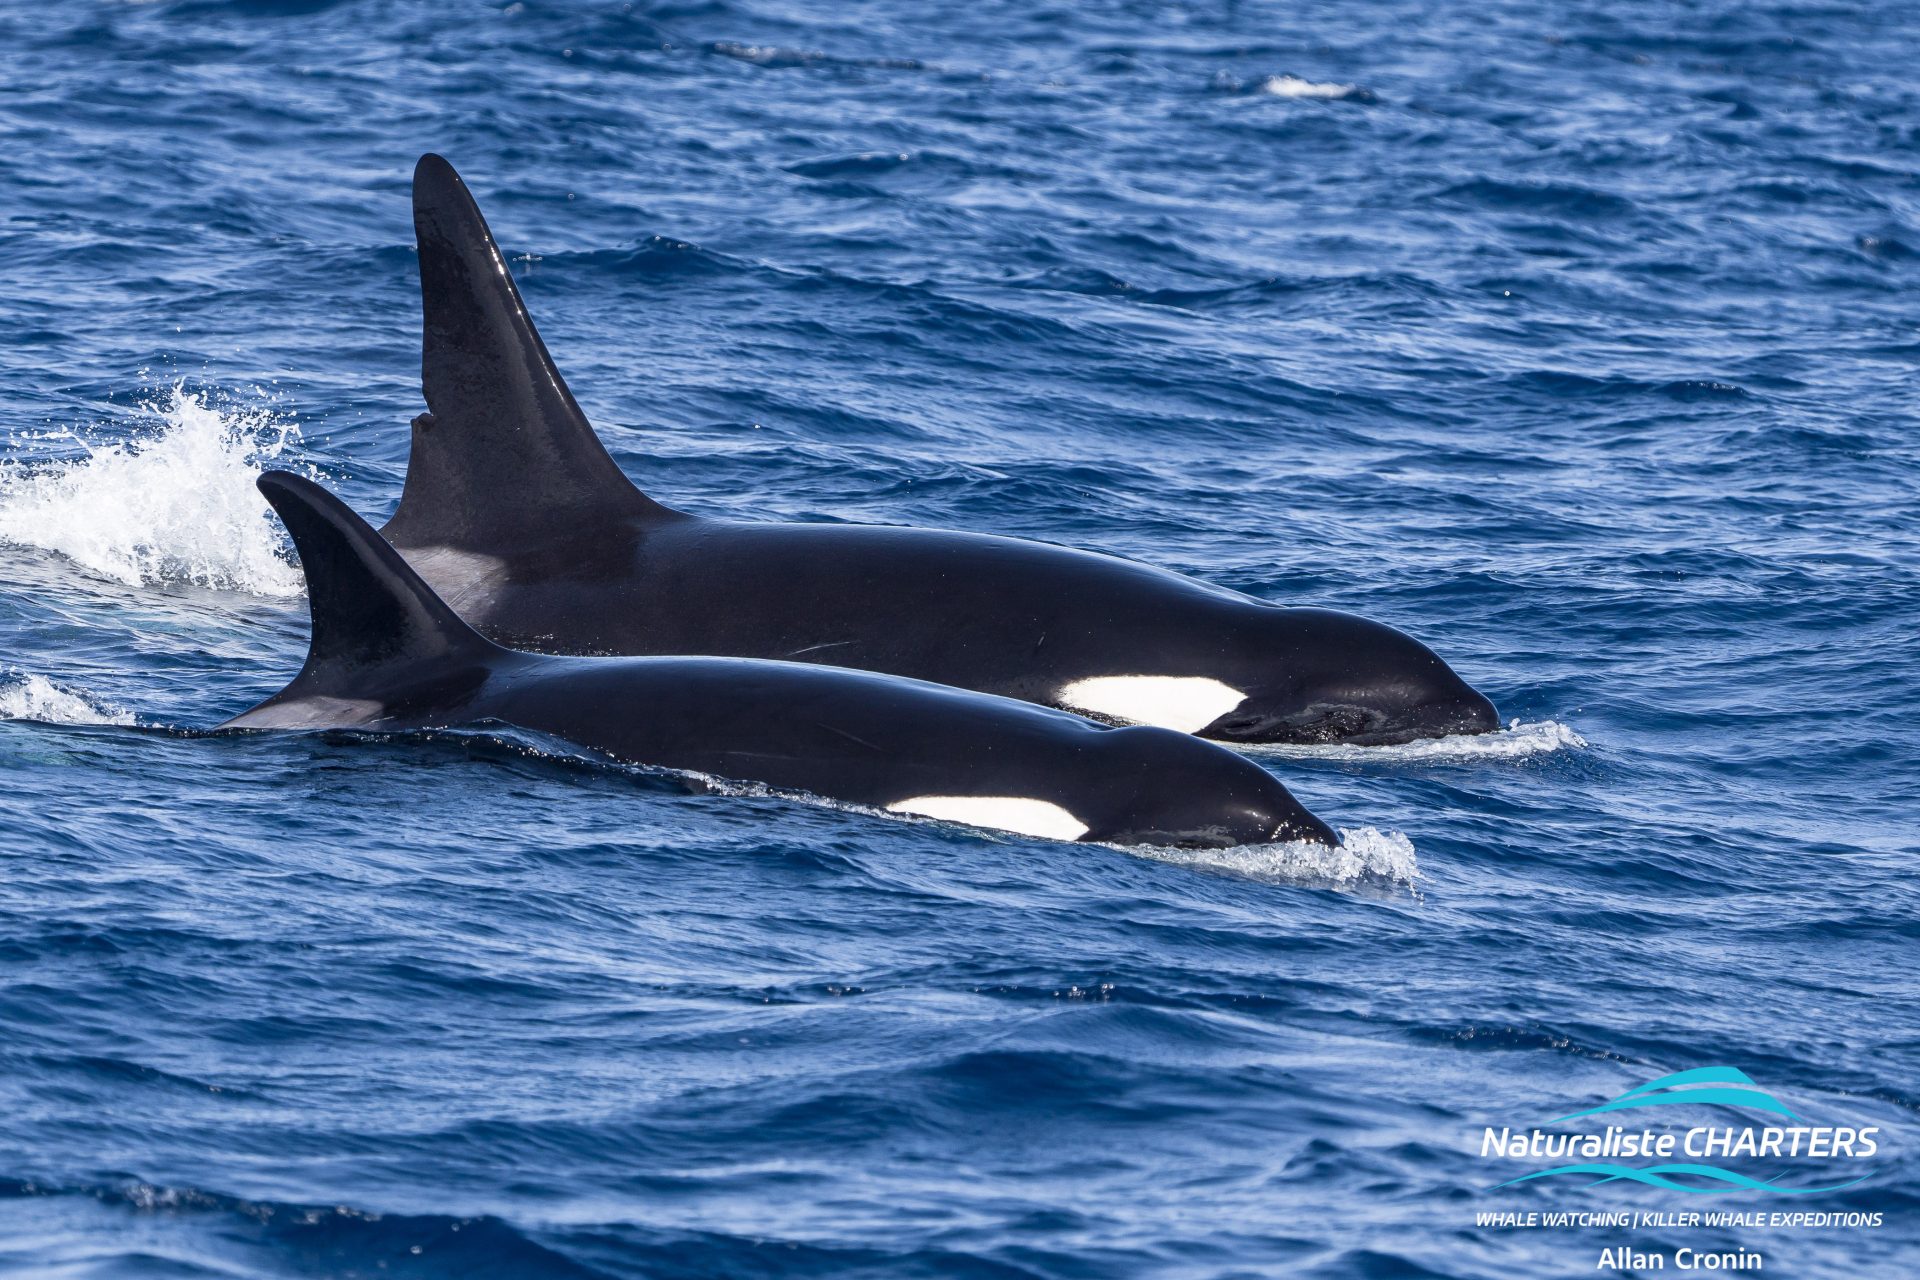 Killer Whales are known to frequent Bremer Canyon